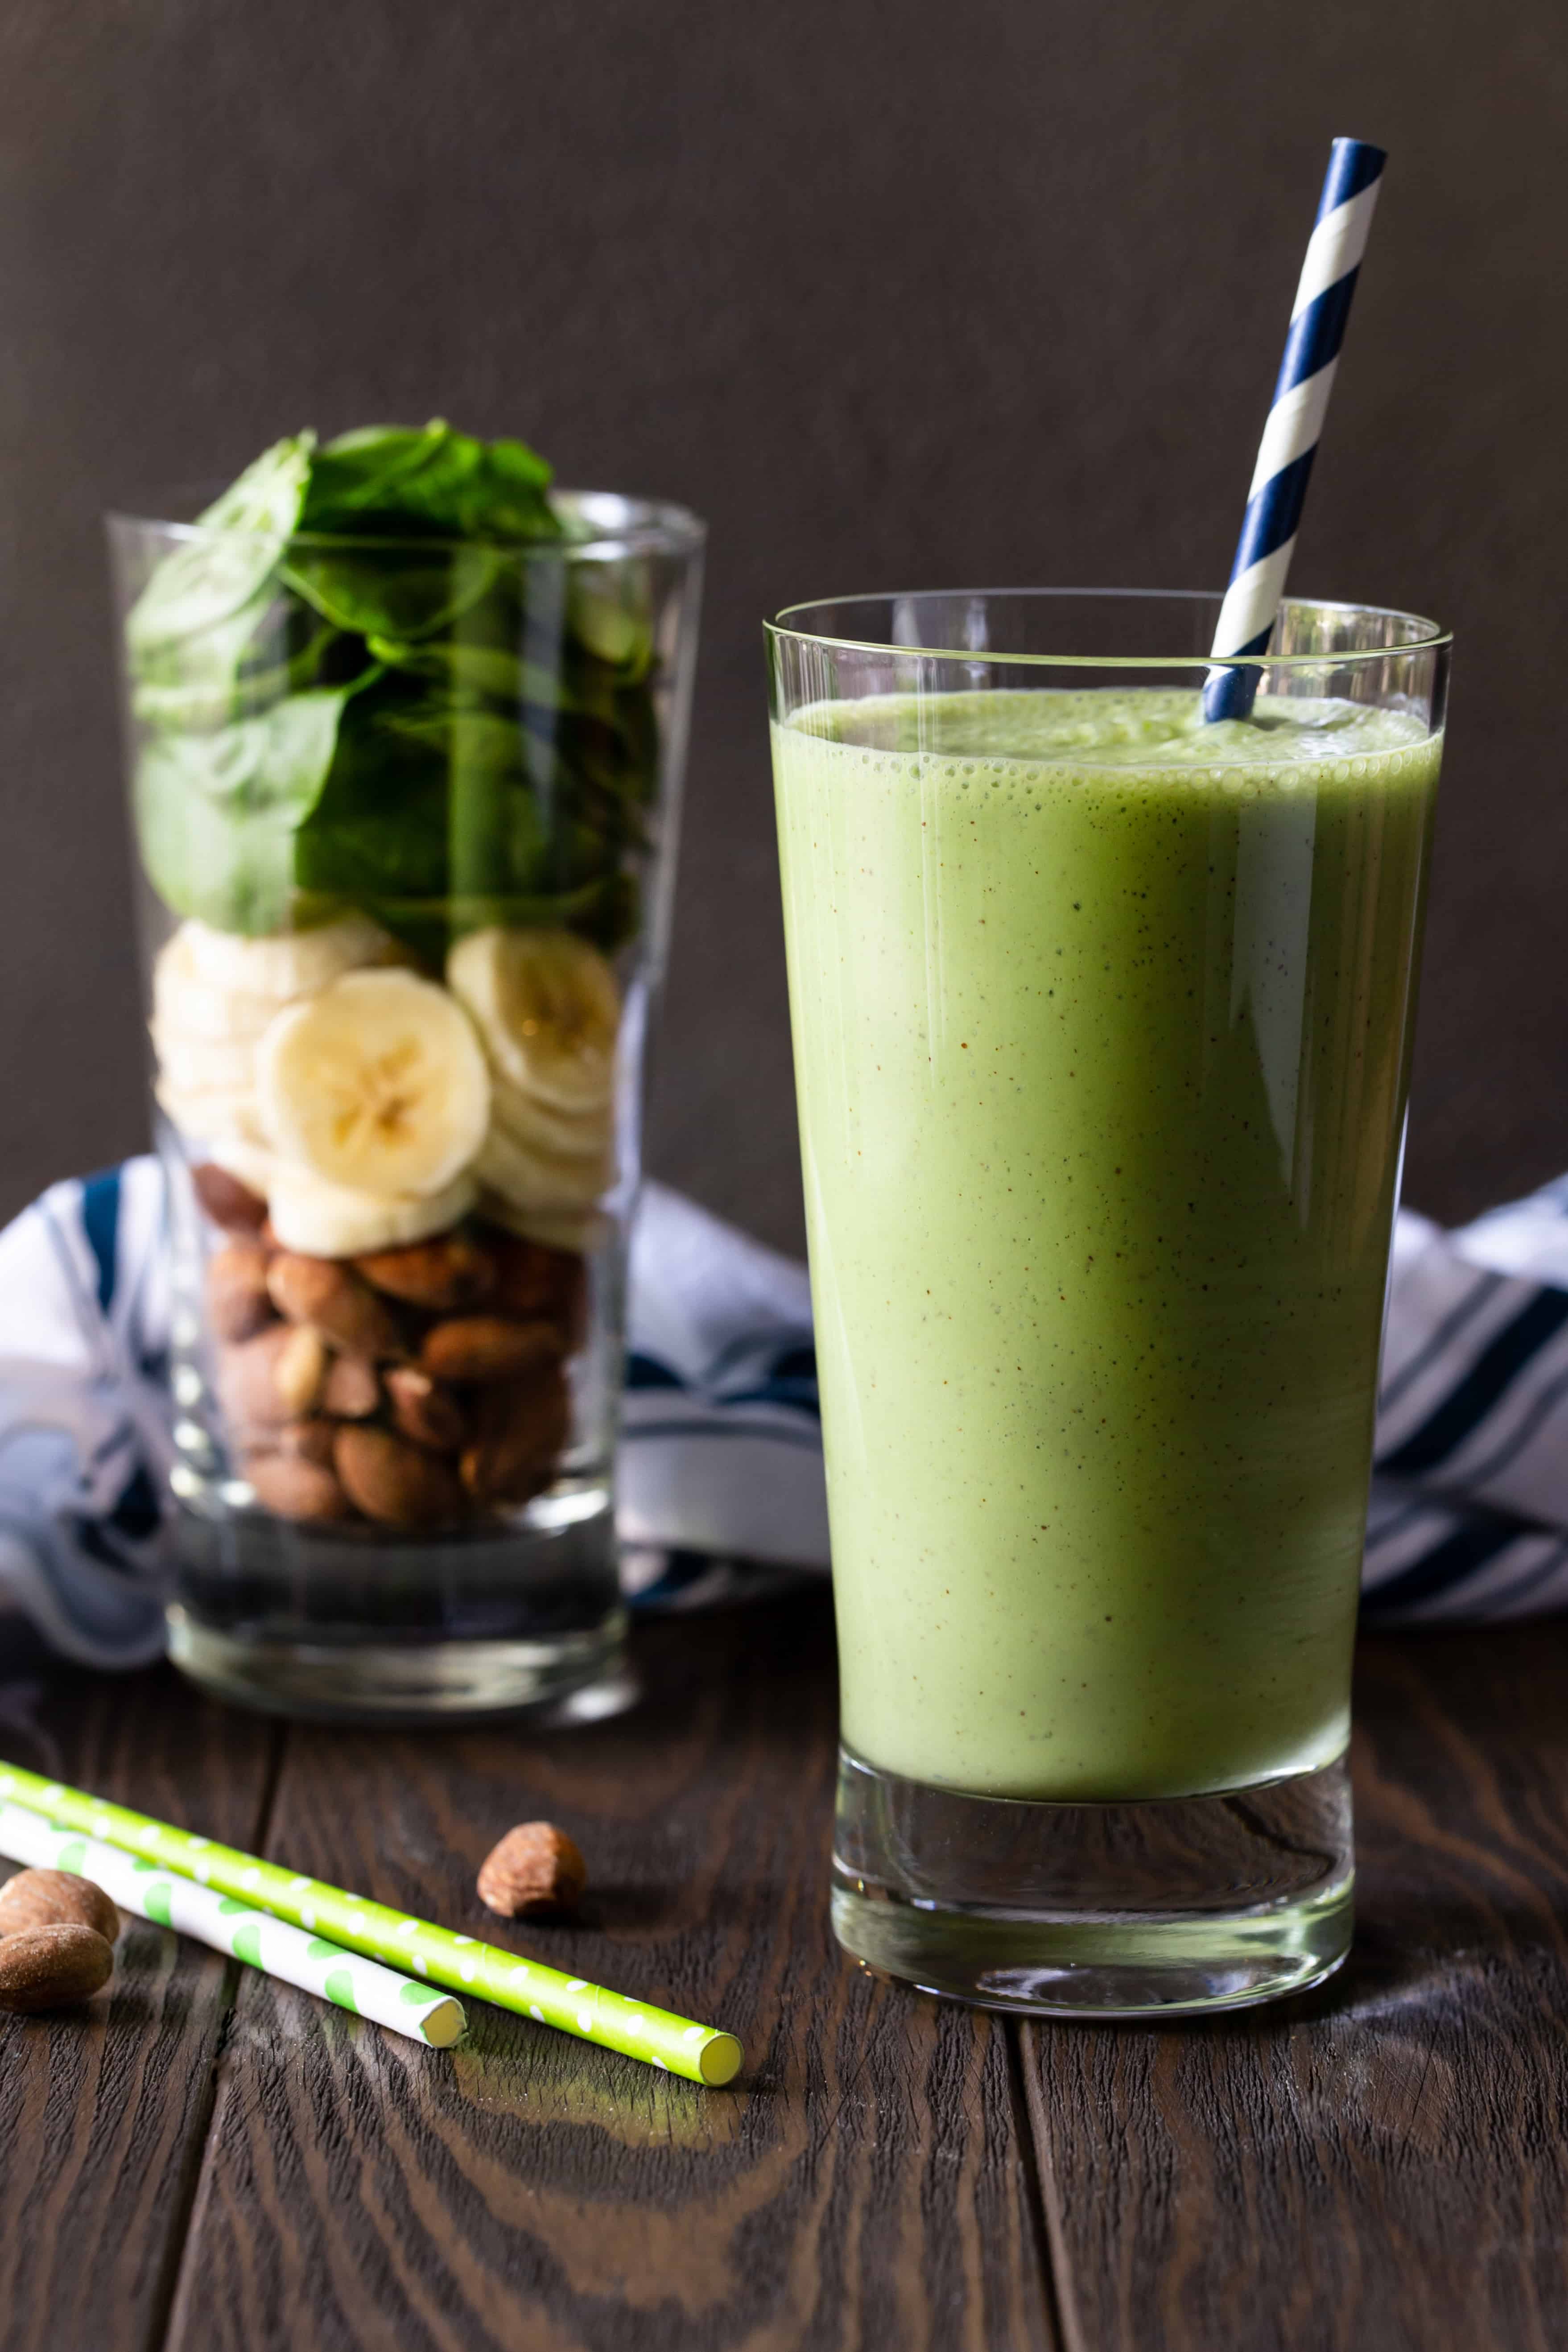 https://www.garnishwithlemon.com/wp-content/uploads/2019/08/Easy-Banana-Spinach-Protein-Smoothie-2019-2-of-3.jpg